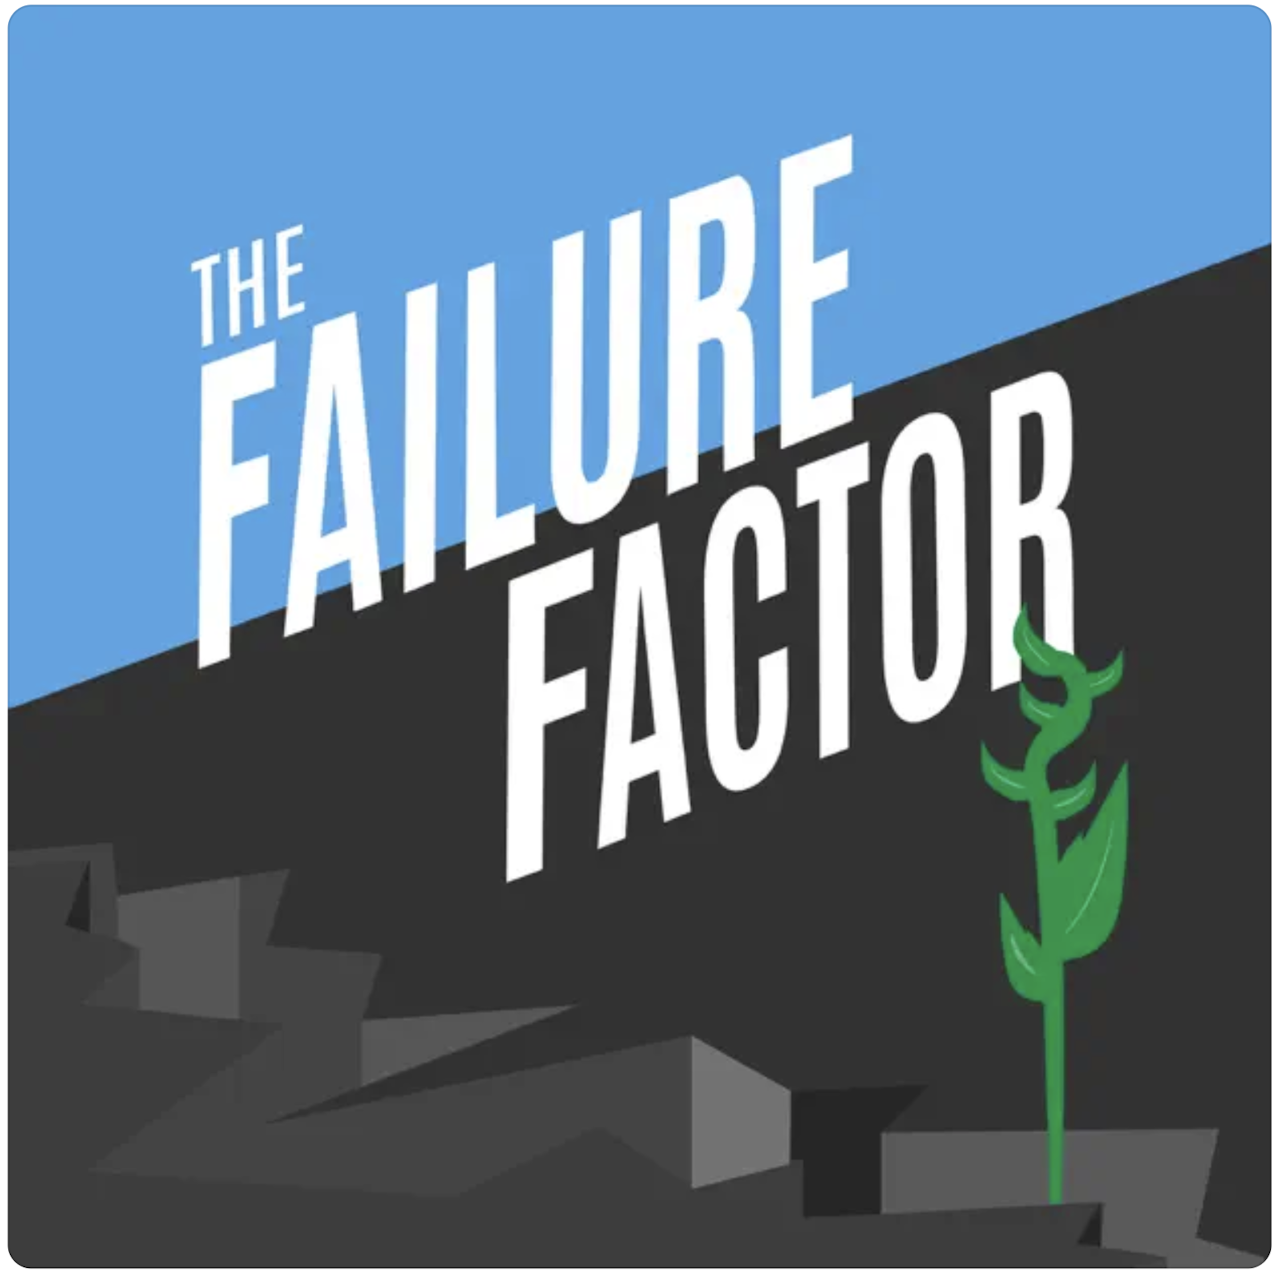 Best Sales Podcasts: The Failure Factor